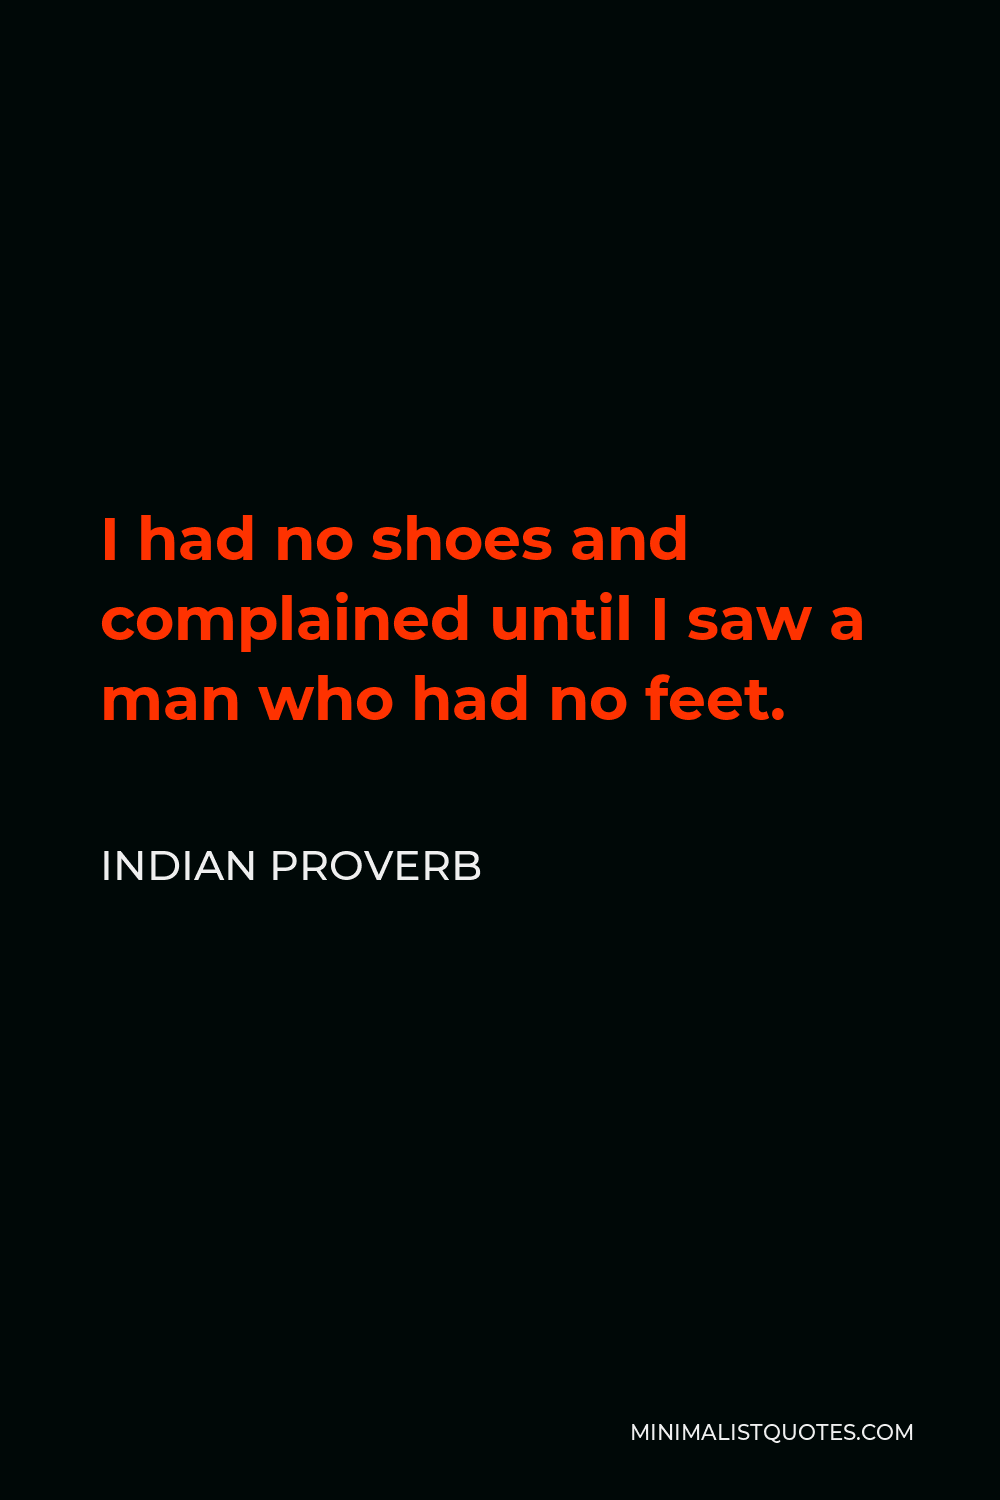 Indian Proverb Quote - I had no shoes and complained until I saw a man who had no feet.